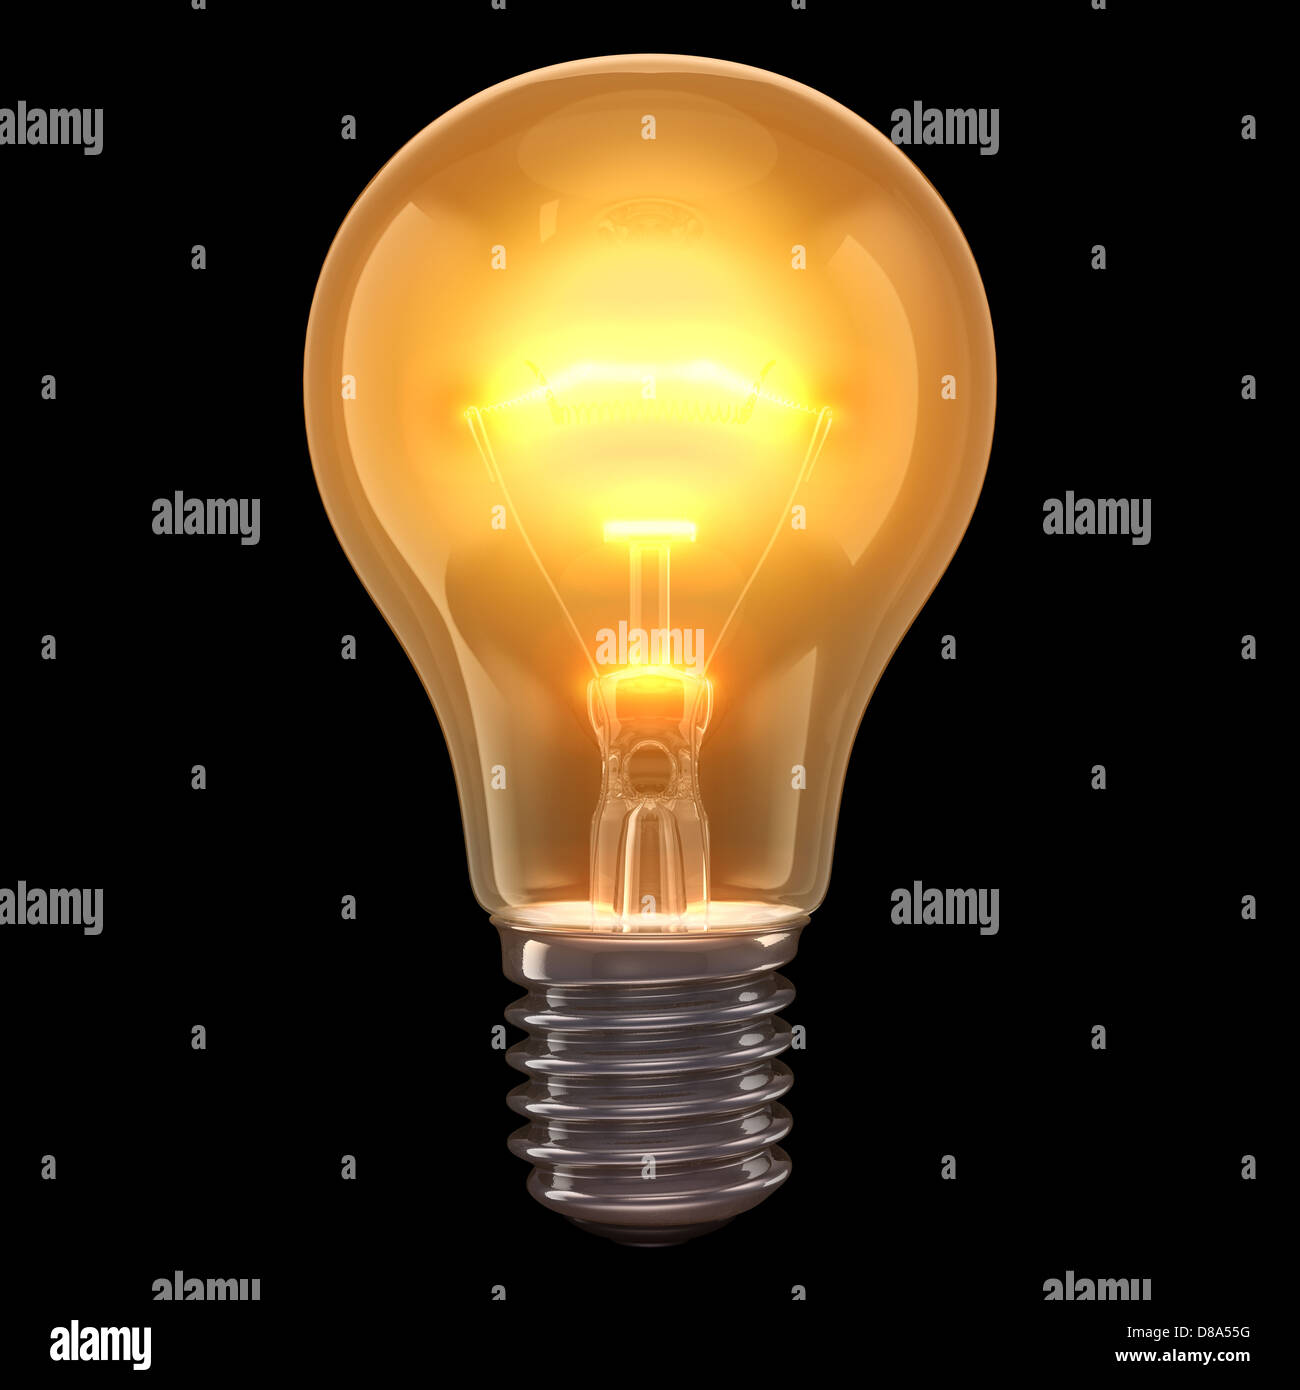 Incandescent lamp burning on a black background. Stock Photo